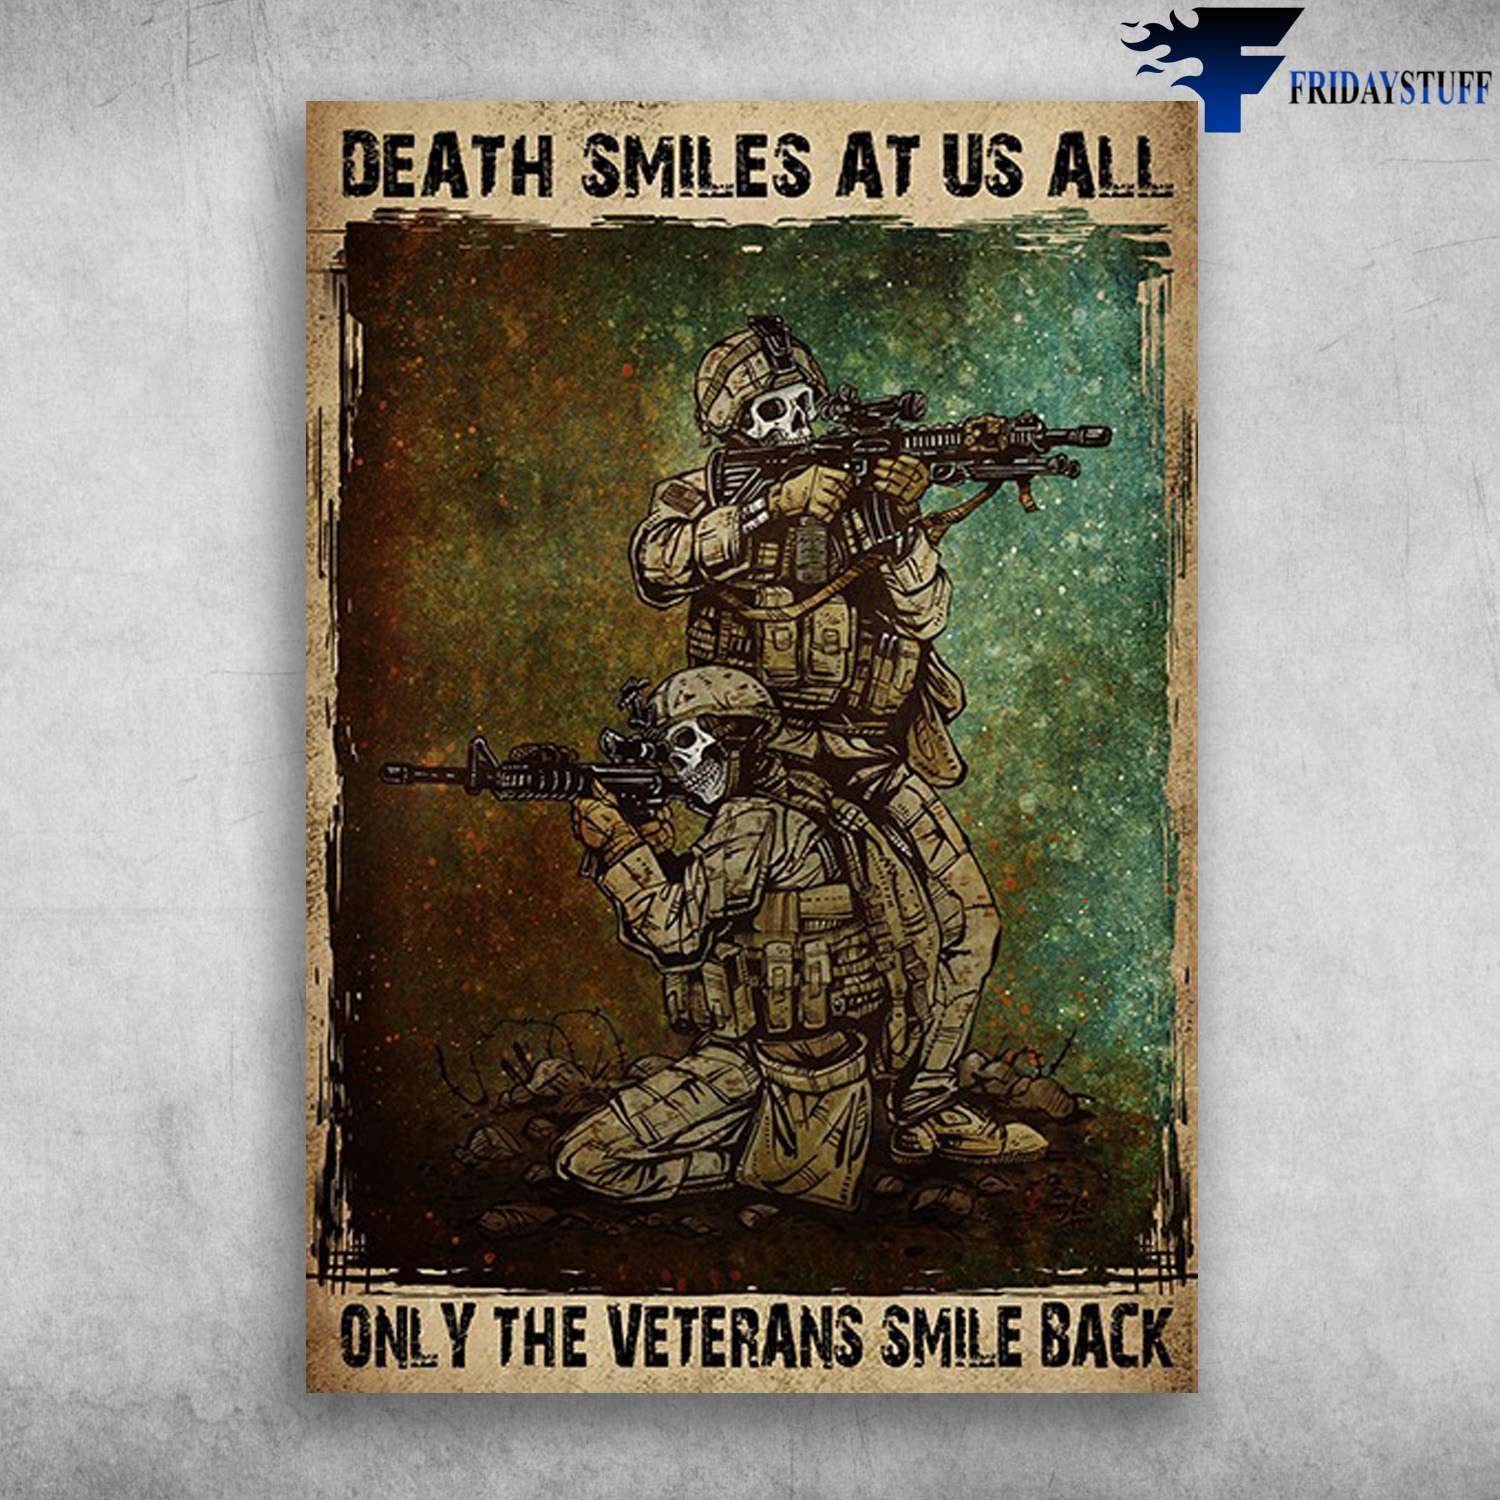 Death Soldier, War Poster - Death Smiles At Us All, Only The Veterans Smile Back